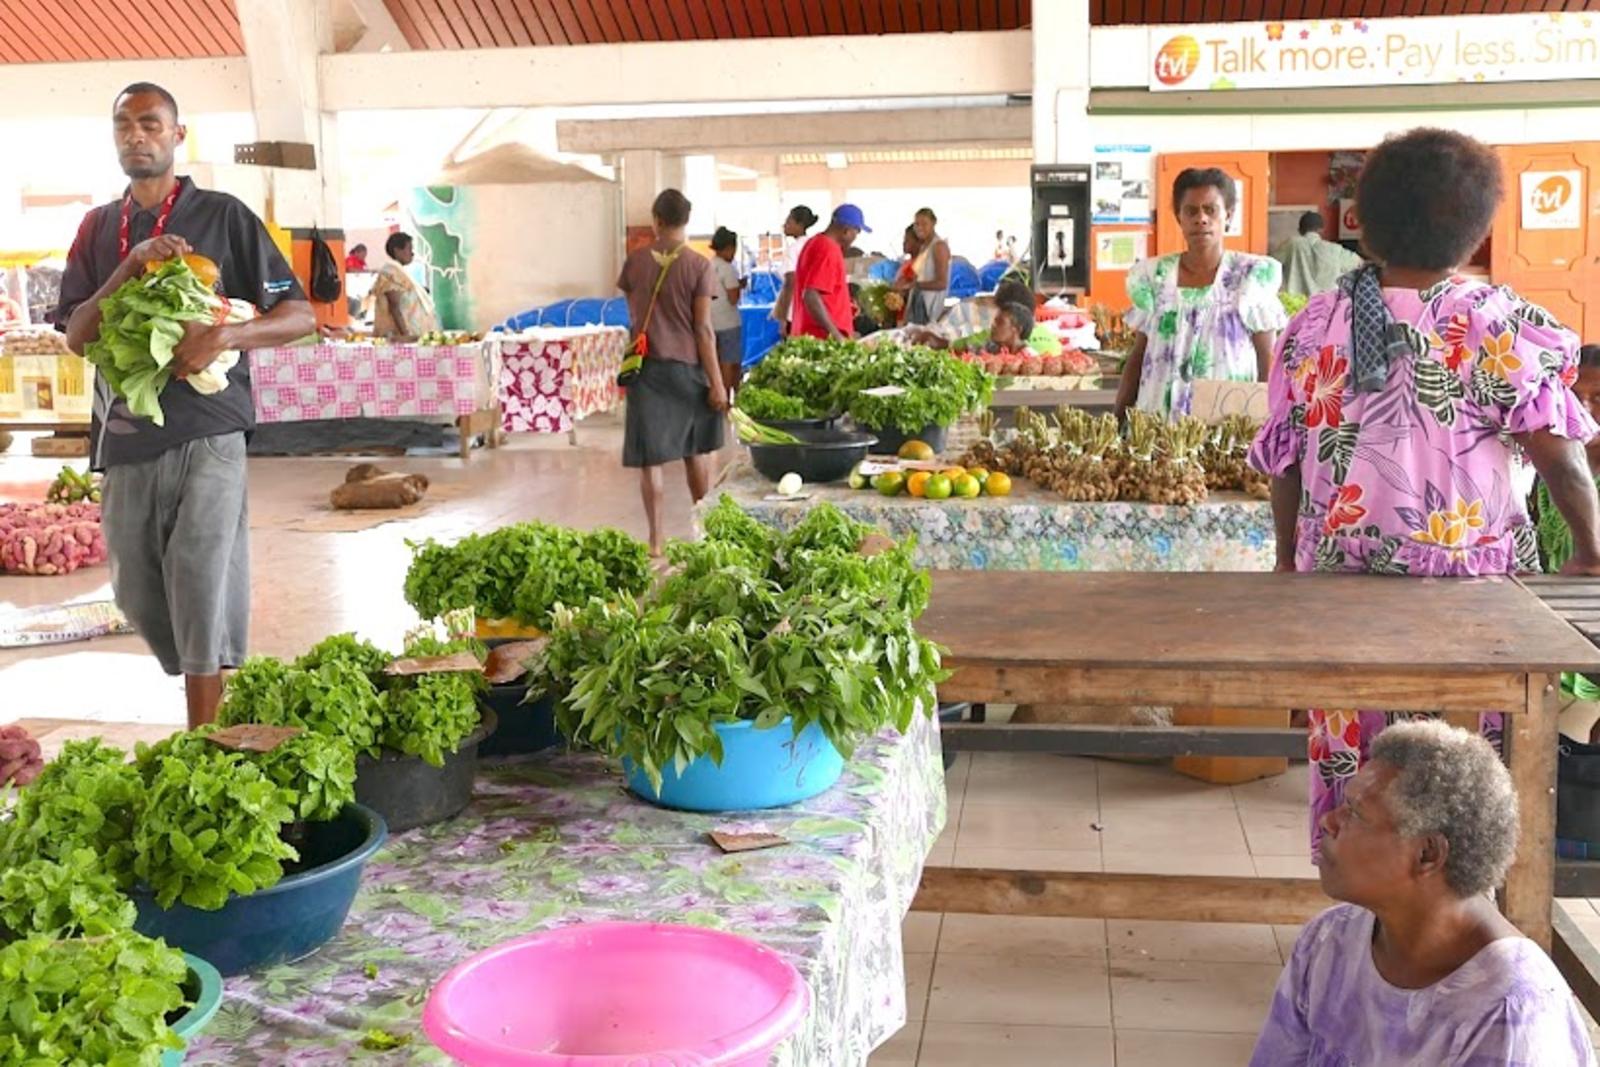 Port Vila's market hall has opened again over a month after cyclone pam struck Vanuatu and destroyed the majority of crops